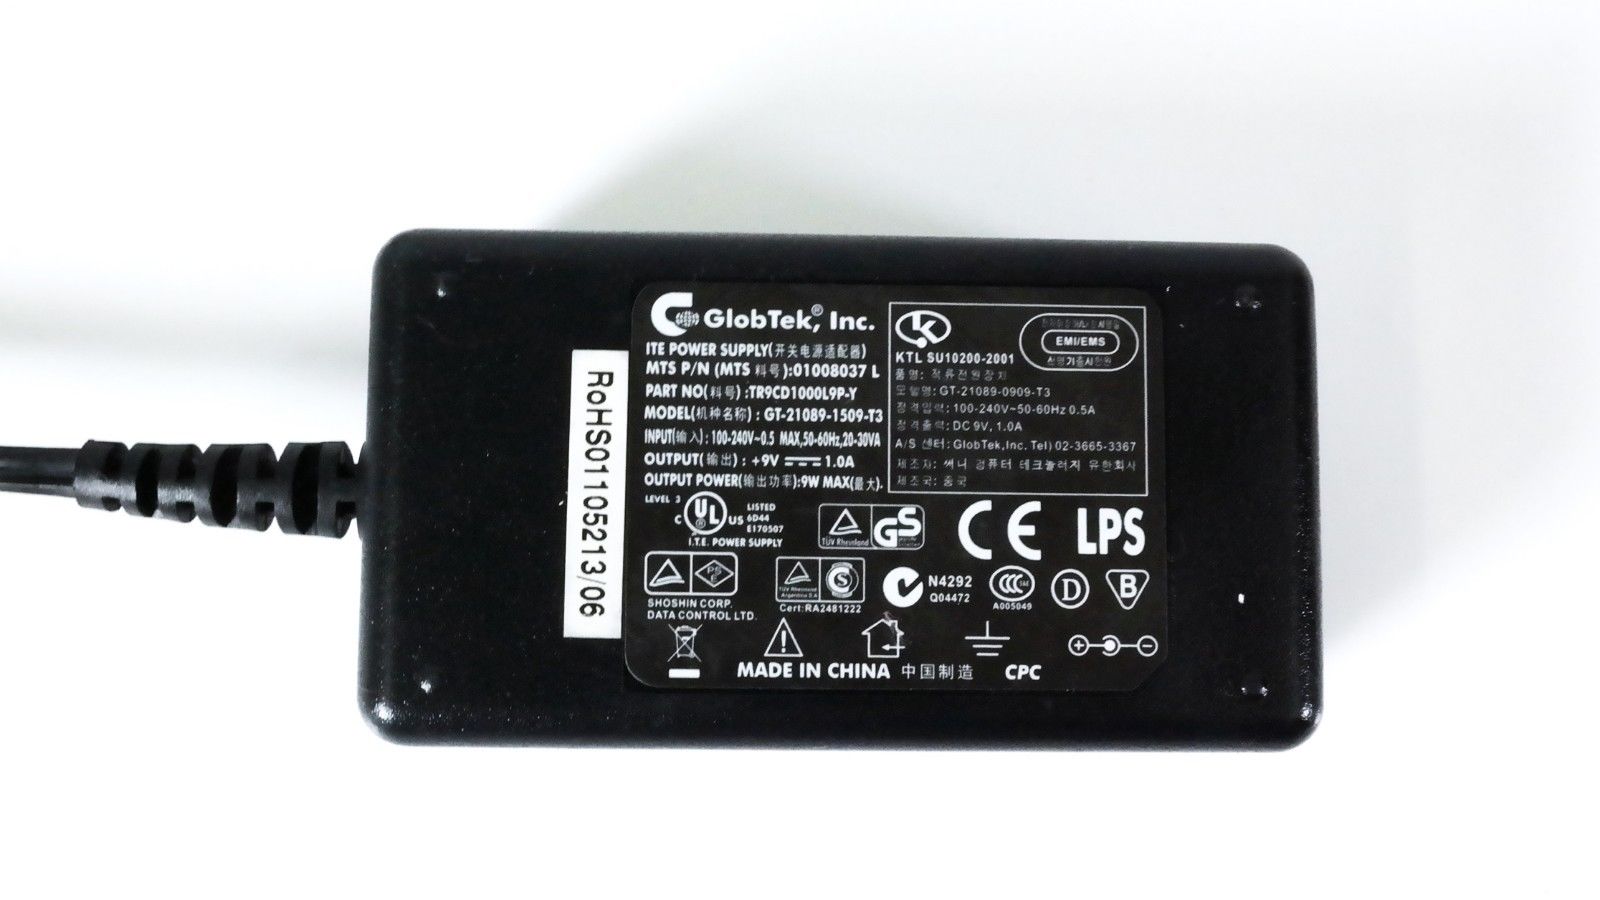 *Brand NEW* 9V 1.0A GlobTek Inc TR9CD1000L9P-Y GT-21089-1509-T3 9W Max AC Power Adapter - Click Image to Close